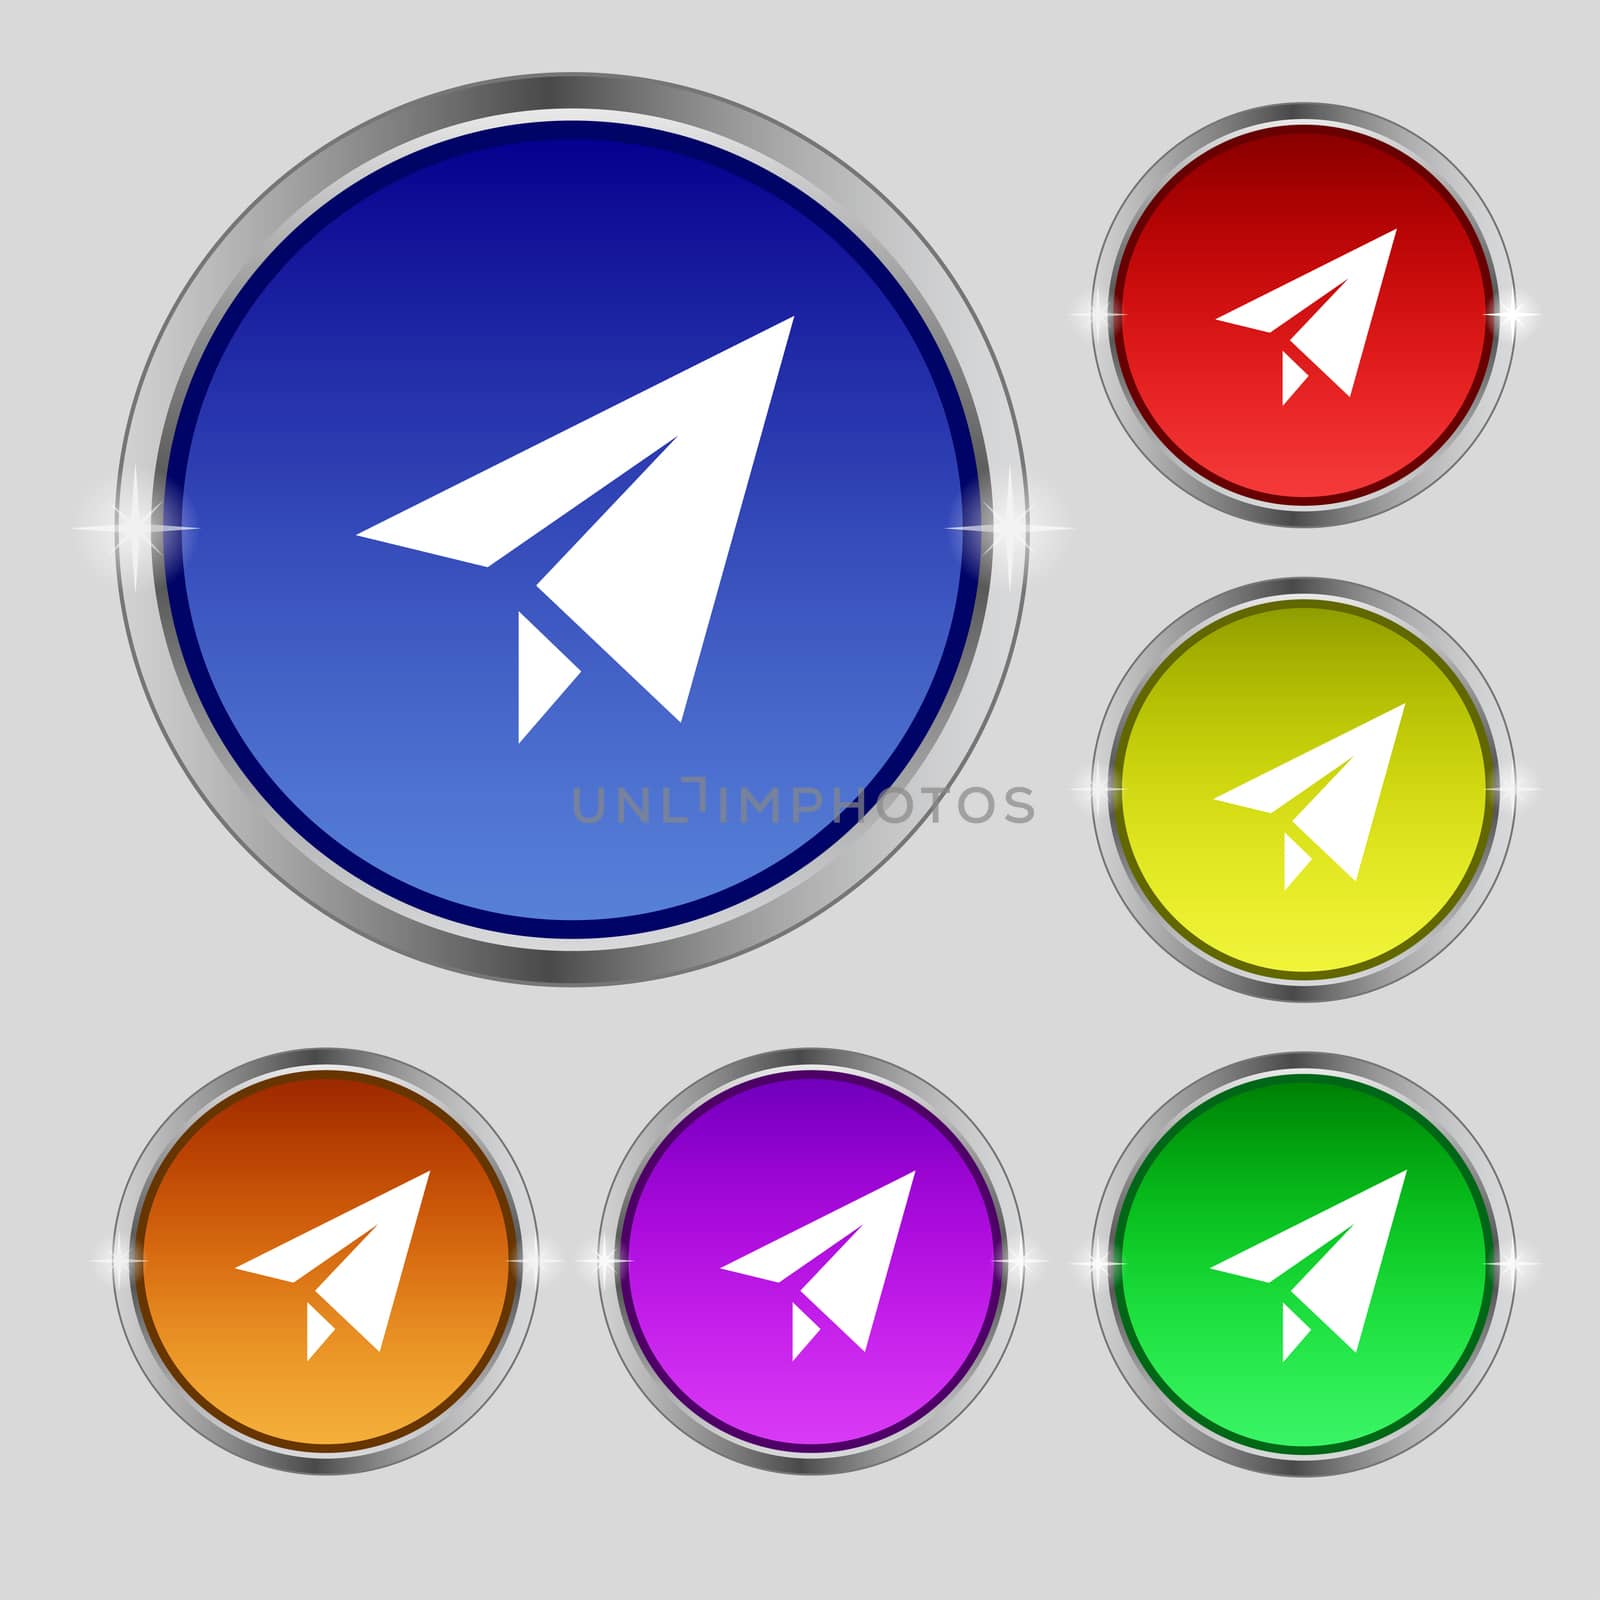 Paper airplane icon sign. Round symbol on bright colourful buttons. illustration